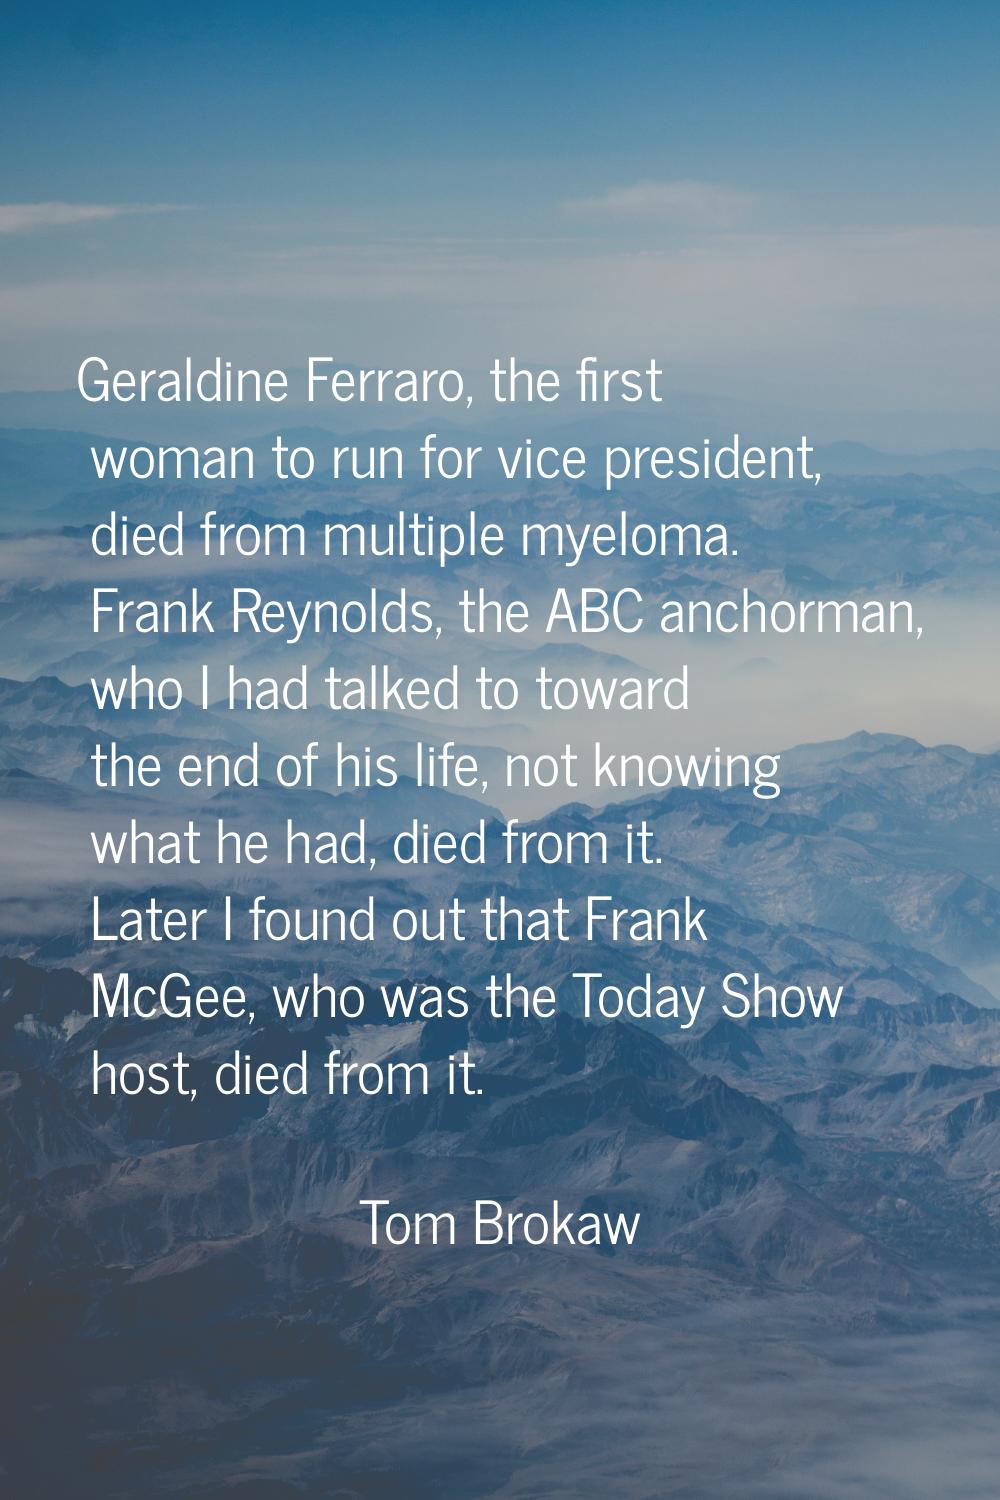 Geraldine Ferraro, the first woman to run for vice president, died from multiple myeloma. Frank Rey